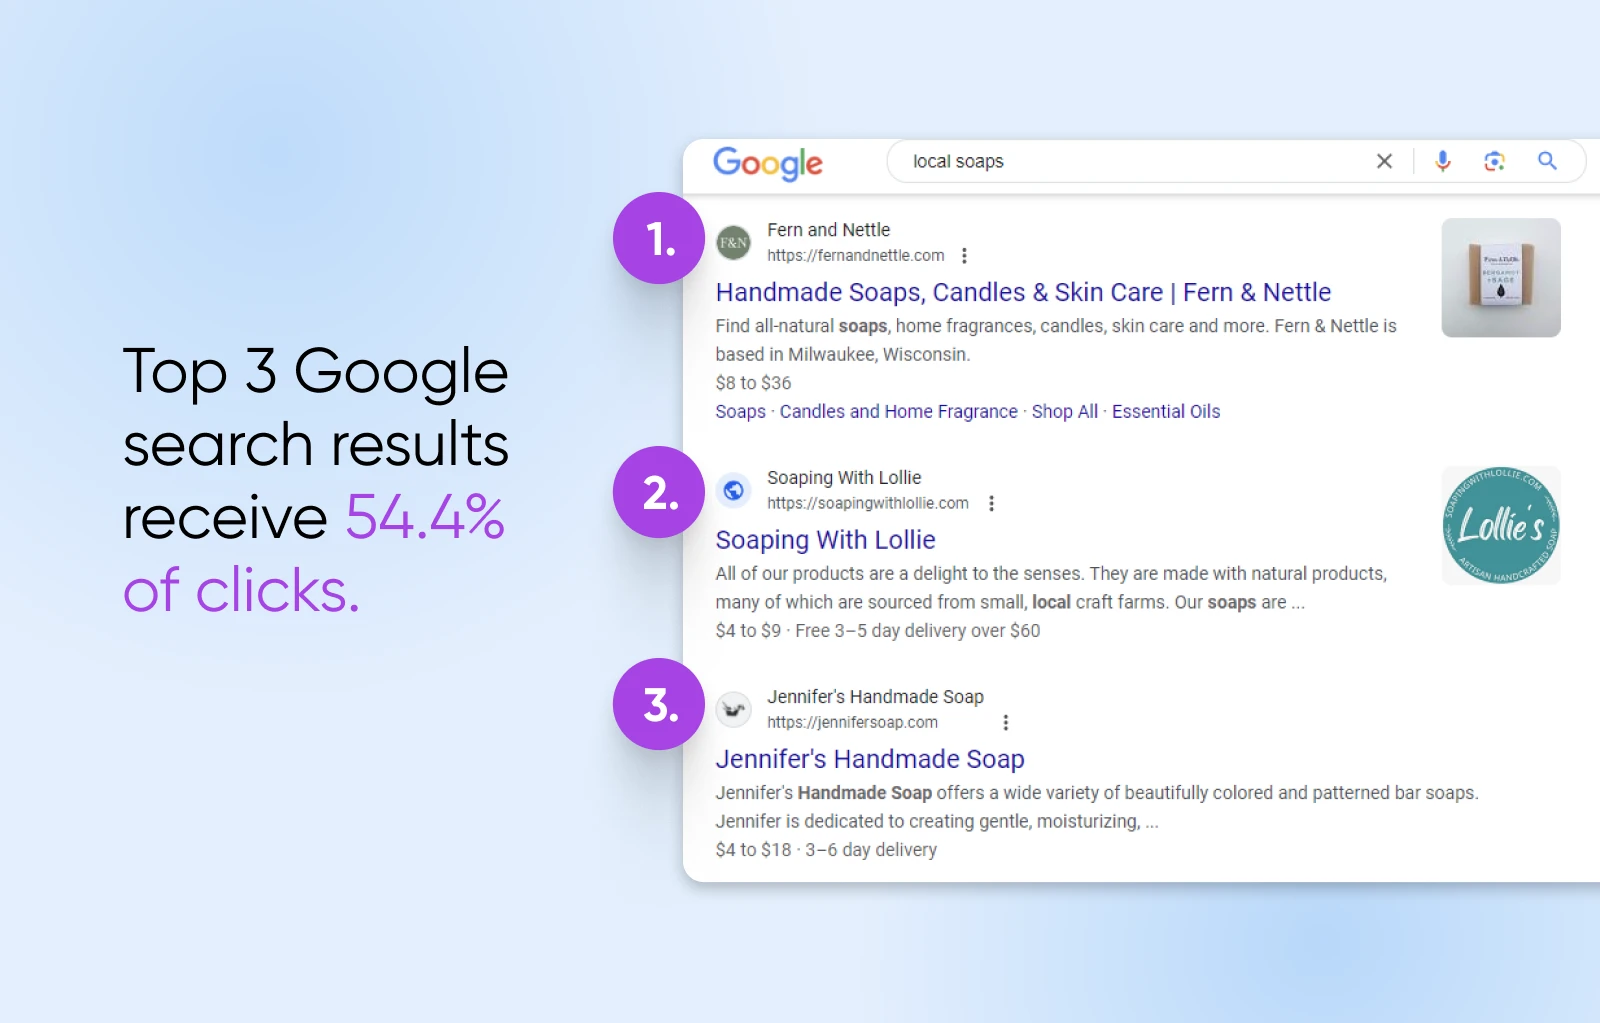 Google search for "local soaps" with the first 3 results in focus. Title: Top 3 Google search results receive 54.4% of clicks.